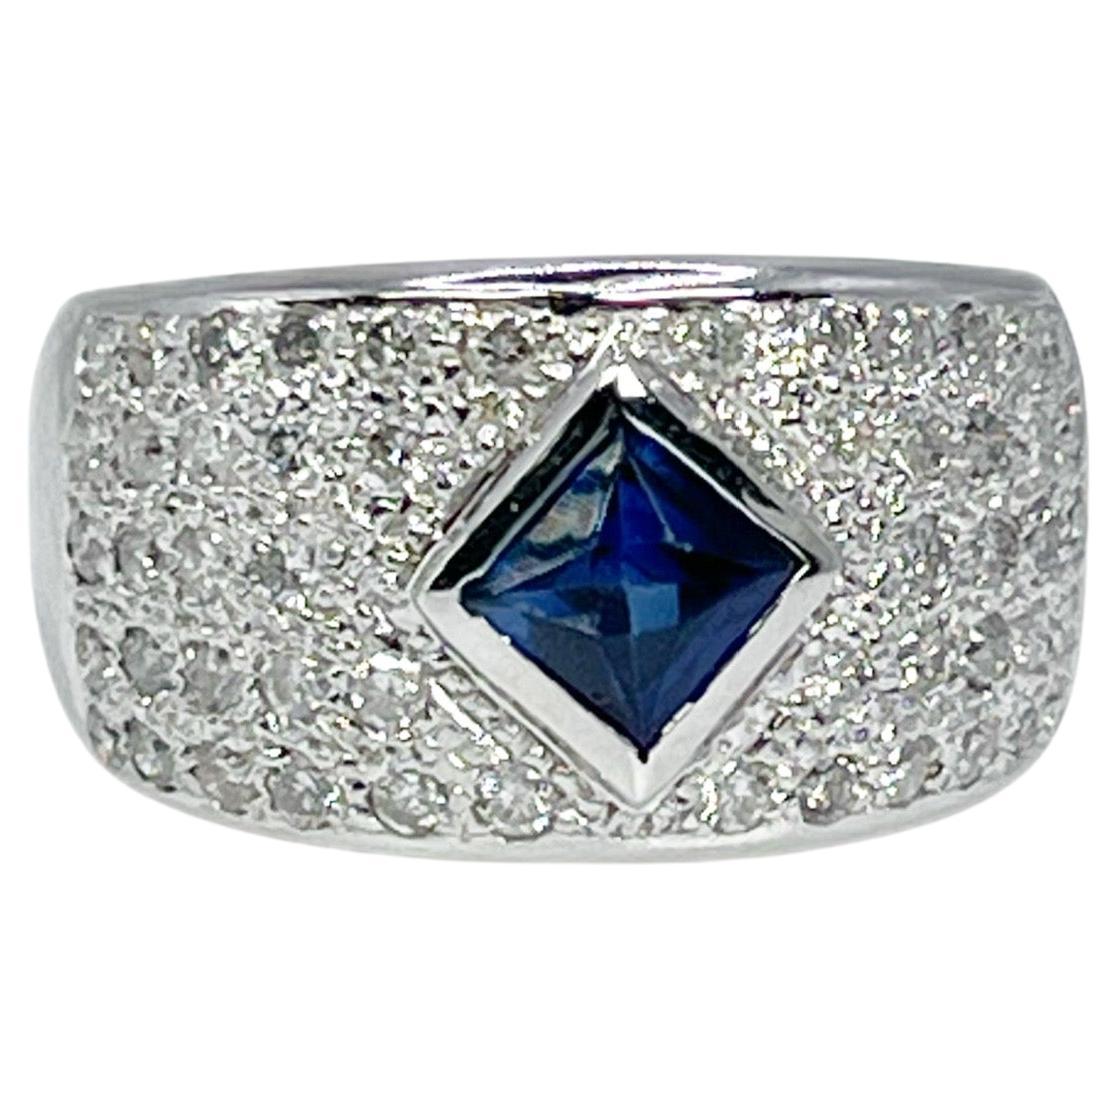 Sapphire & Diamond cocktail ring in 18KT white gold